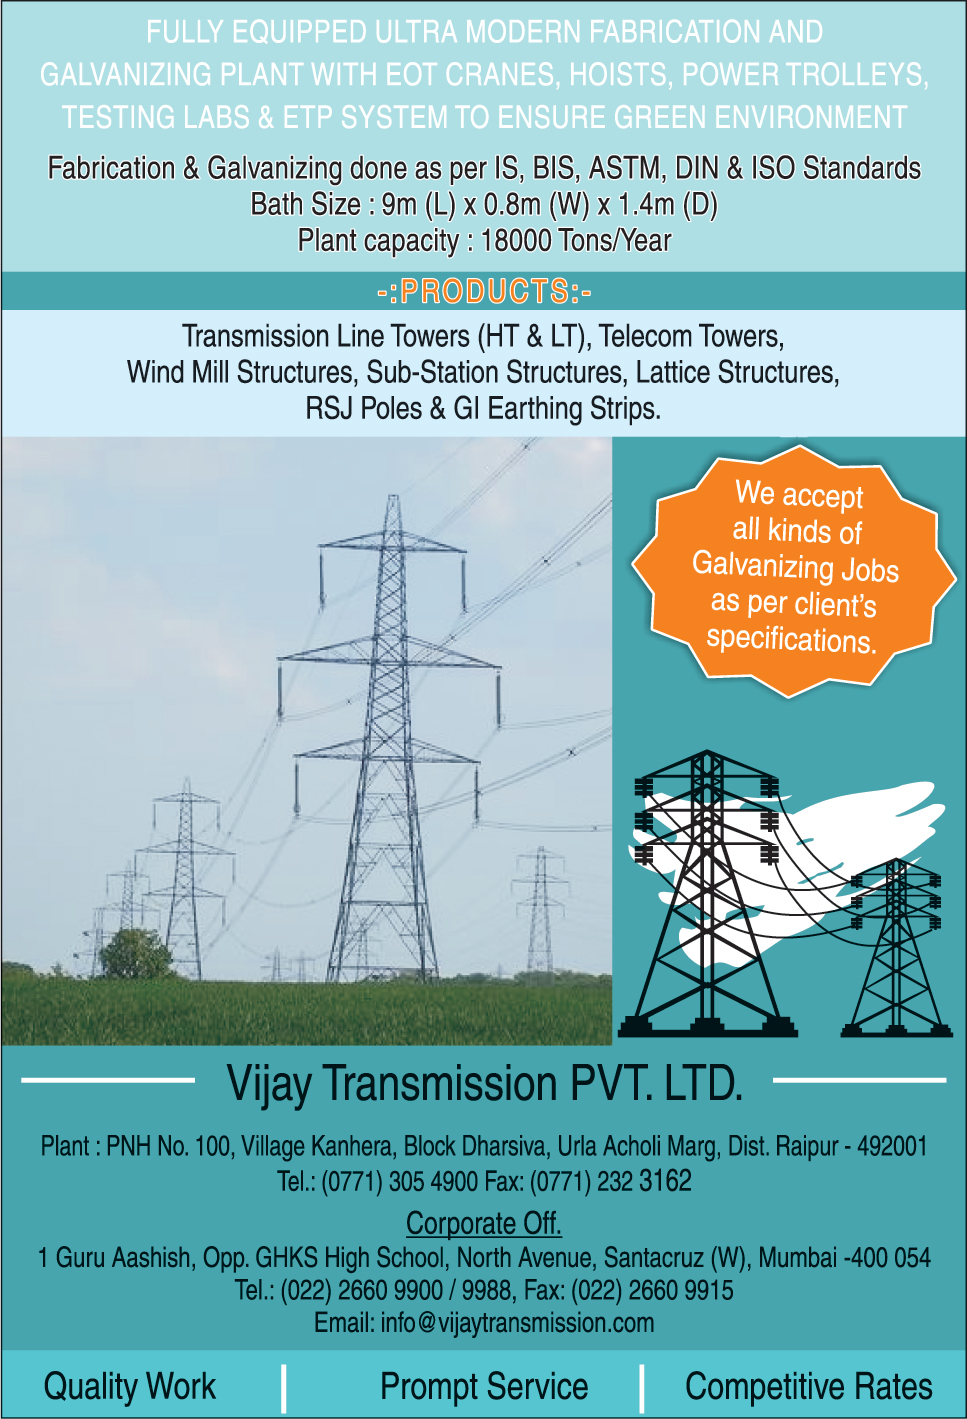 Transmission Line Towers, Telecom Towers, Wind Mill Structures, Sub Station Structures, Lattice structures, RSJ Poles, GI Earthing Strips,Electrical Products, HT Transmission Line Towers, LT Transmission Line Towers